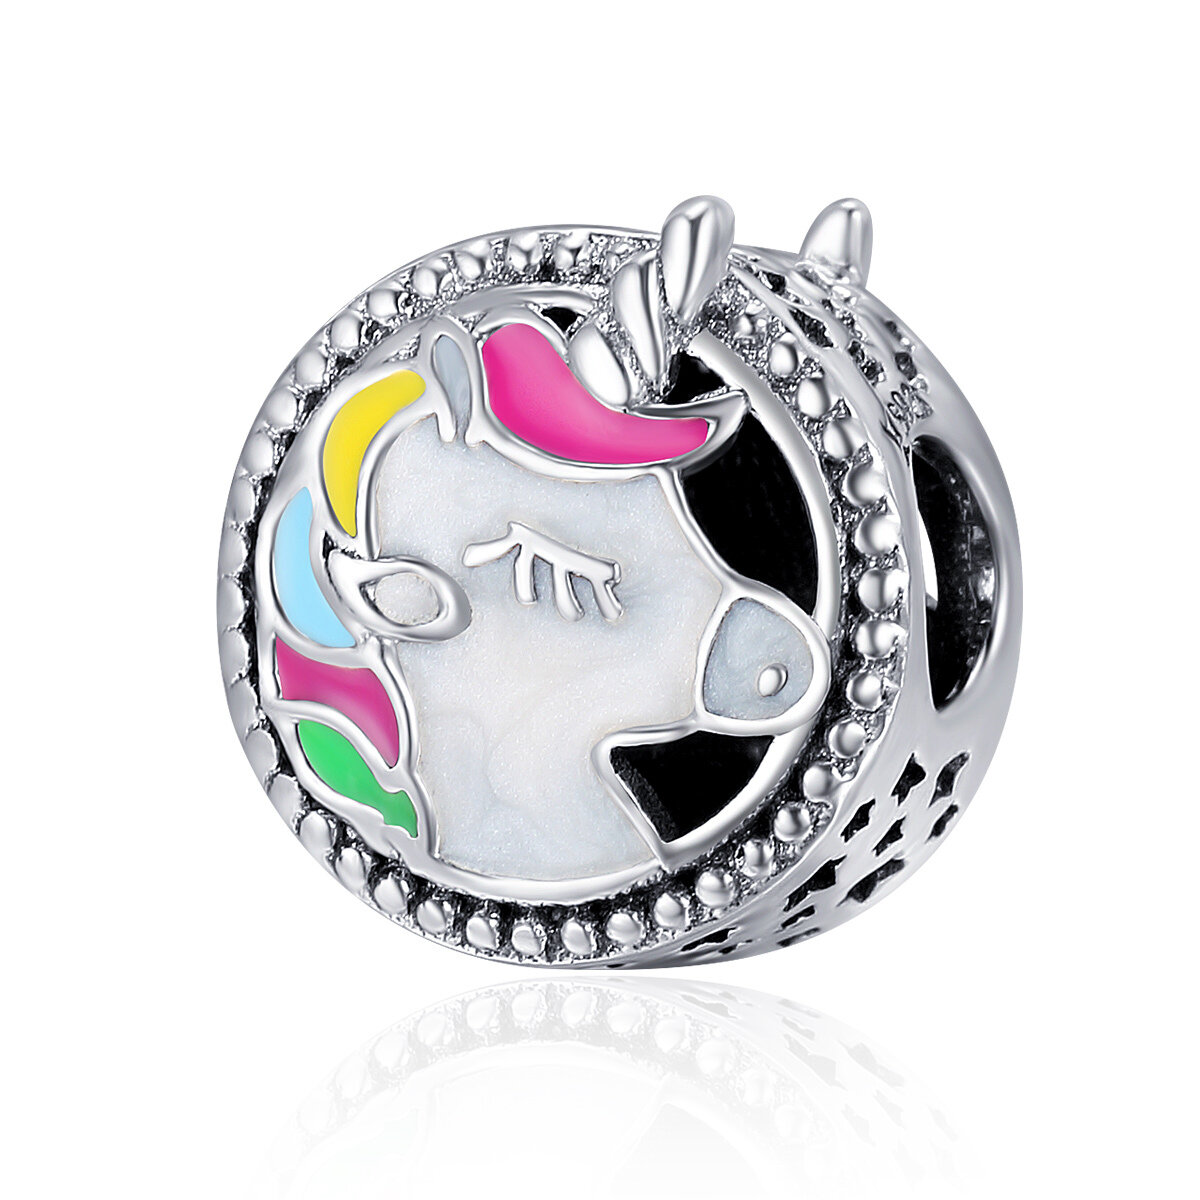 GemKing SCC362 Adorable Unicorn S925 Sterling Silver Charm